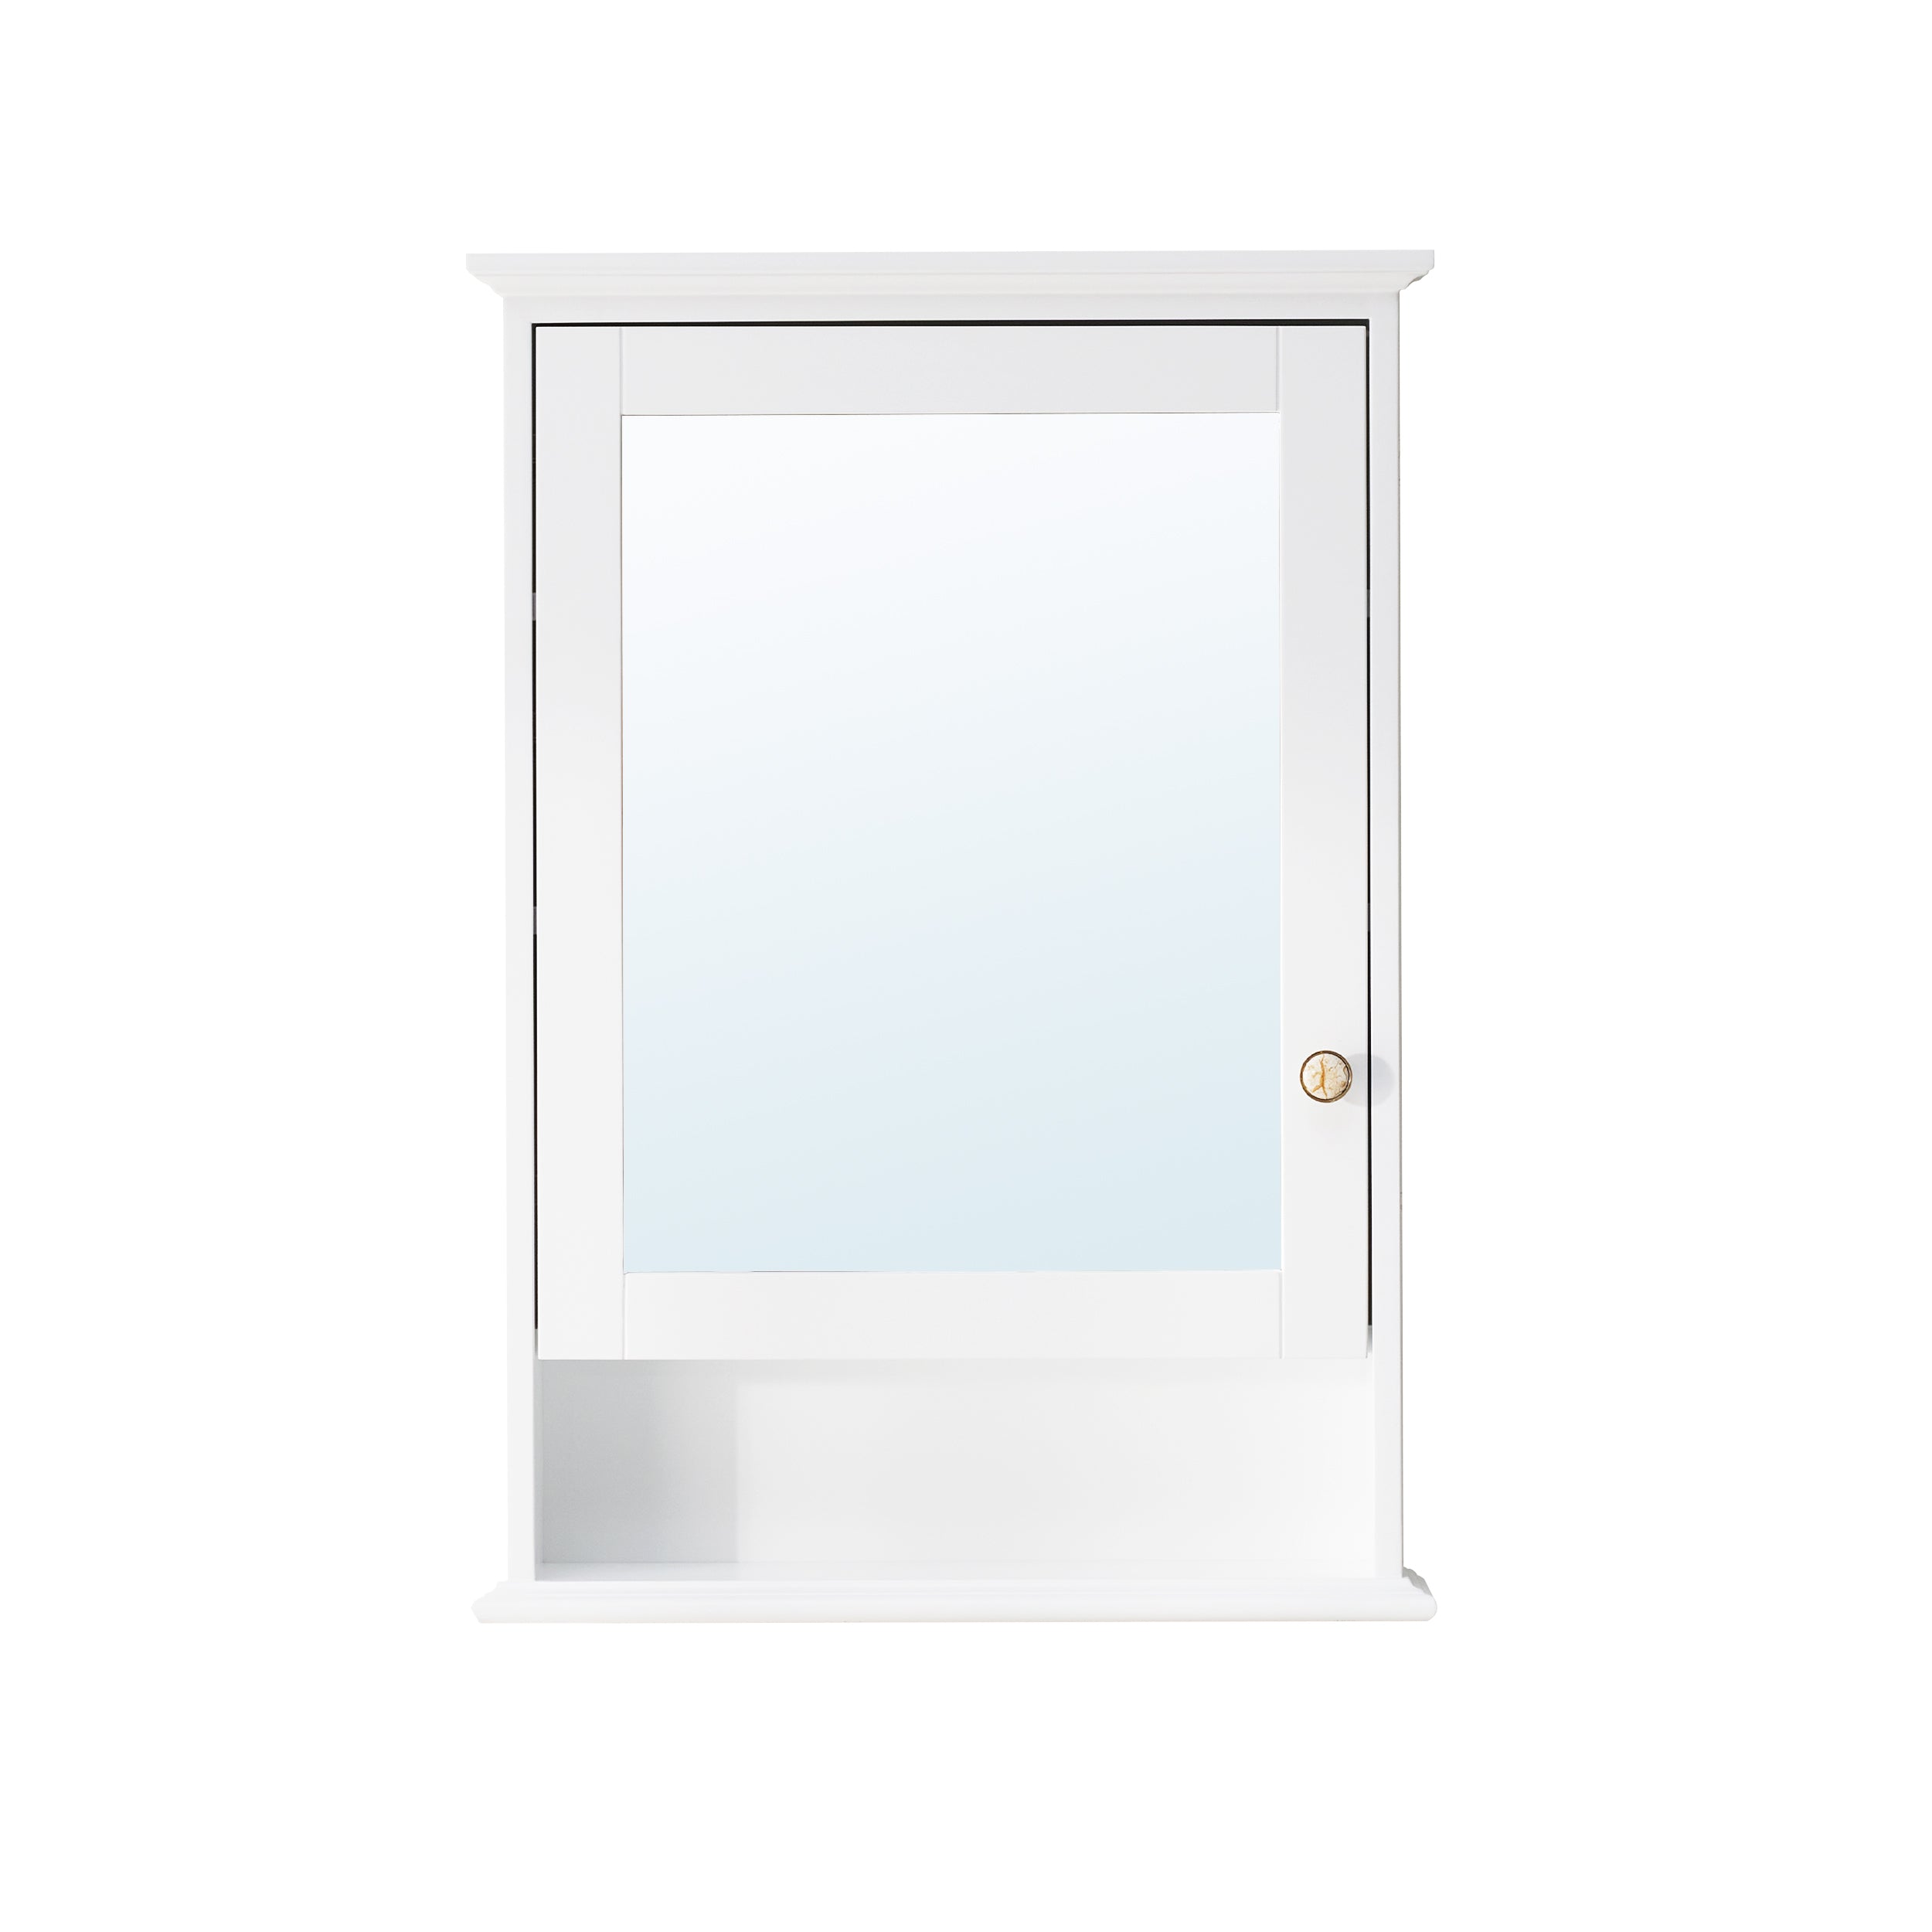 24 in.W x 34 in.H Surface-Mount Bathroom Medicine Cabinet with Mirror in White